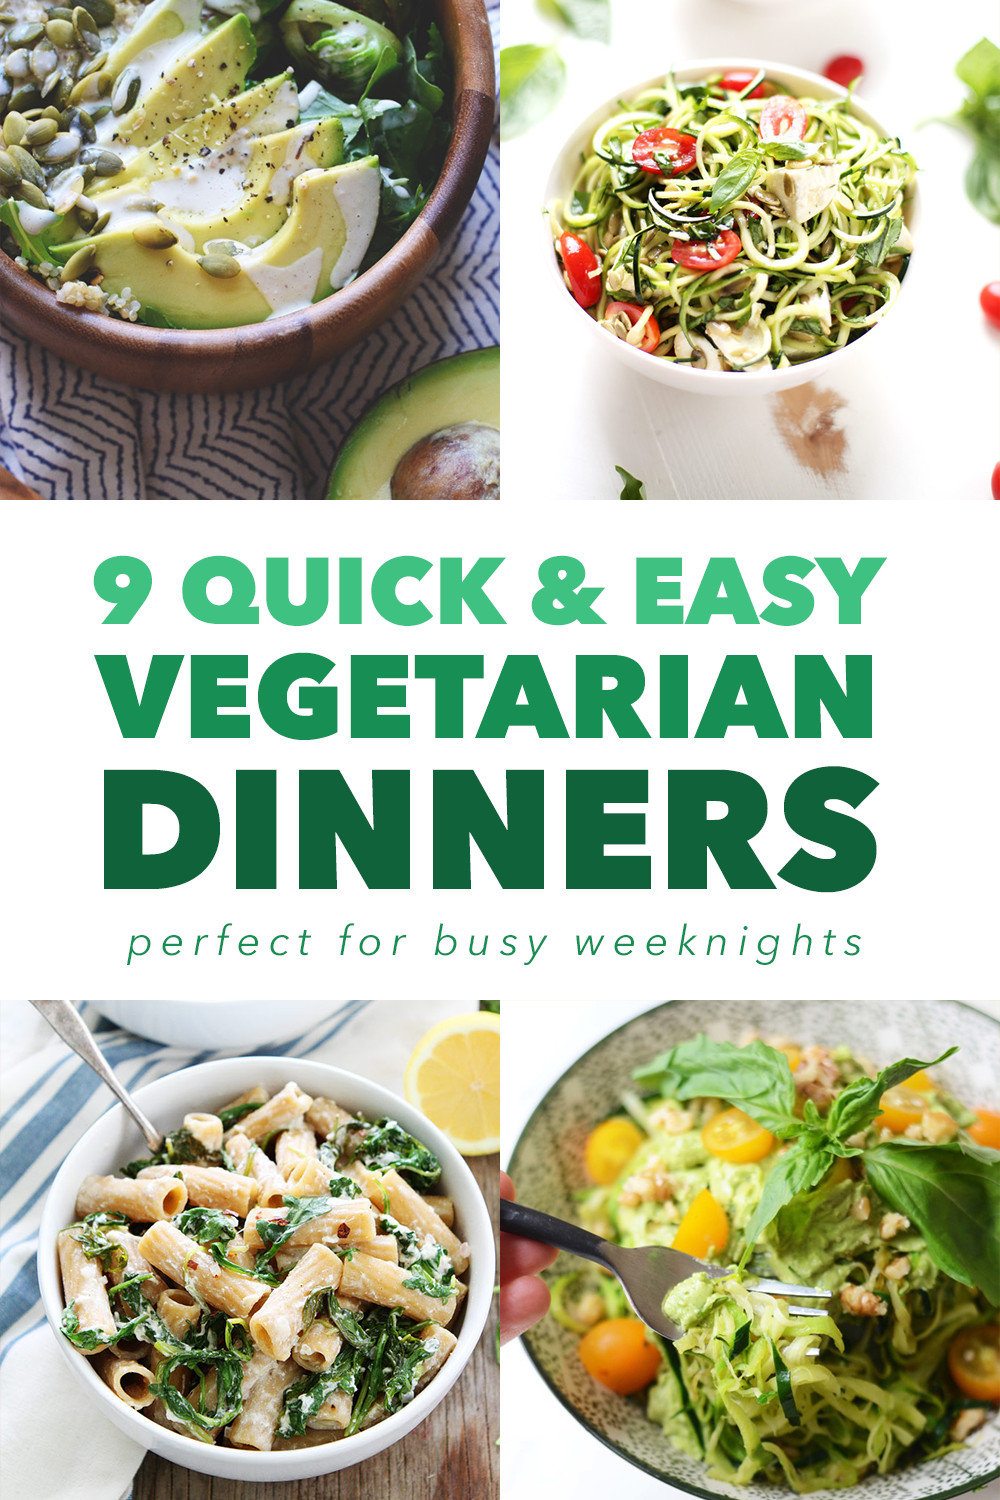 Easy Vegan Dinner Quick
 9 Quick and Easy Ve arian Dinners for Busy Weeknights